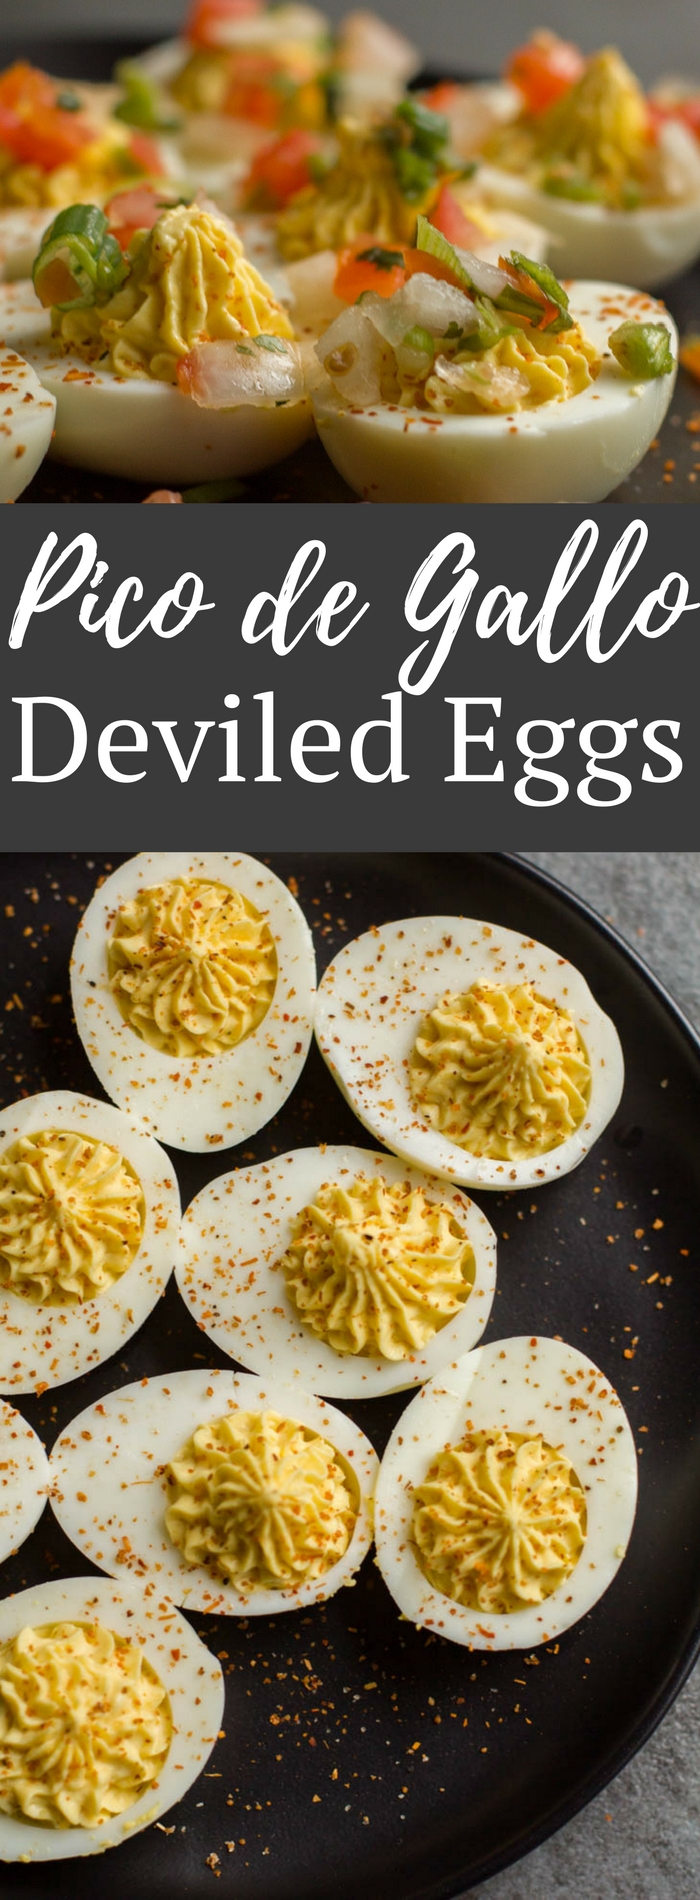 Try this fun Southwestern take on classic deviled eggs. With tastes of pico de gallo and lime, these pico de gallo deviled eggs are sure to be a hit!